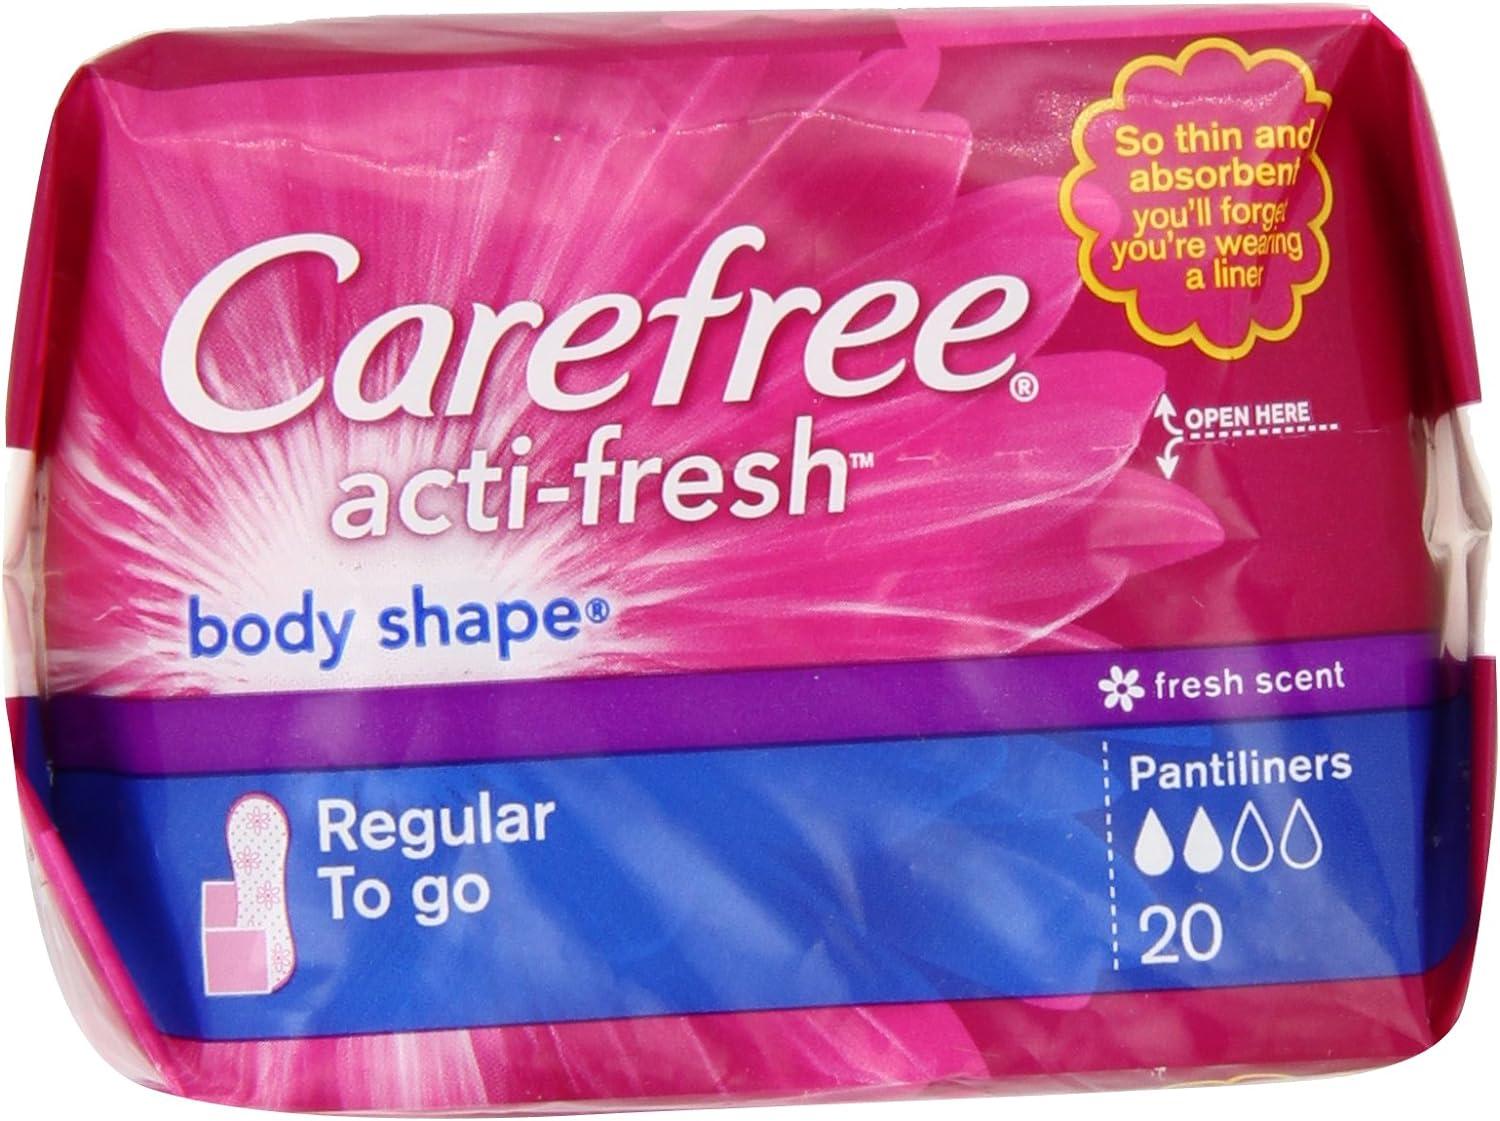 Carefree Acti-Fresh Body Shaped Panty Liners, Regular, 60 Count